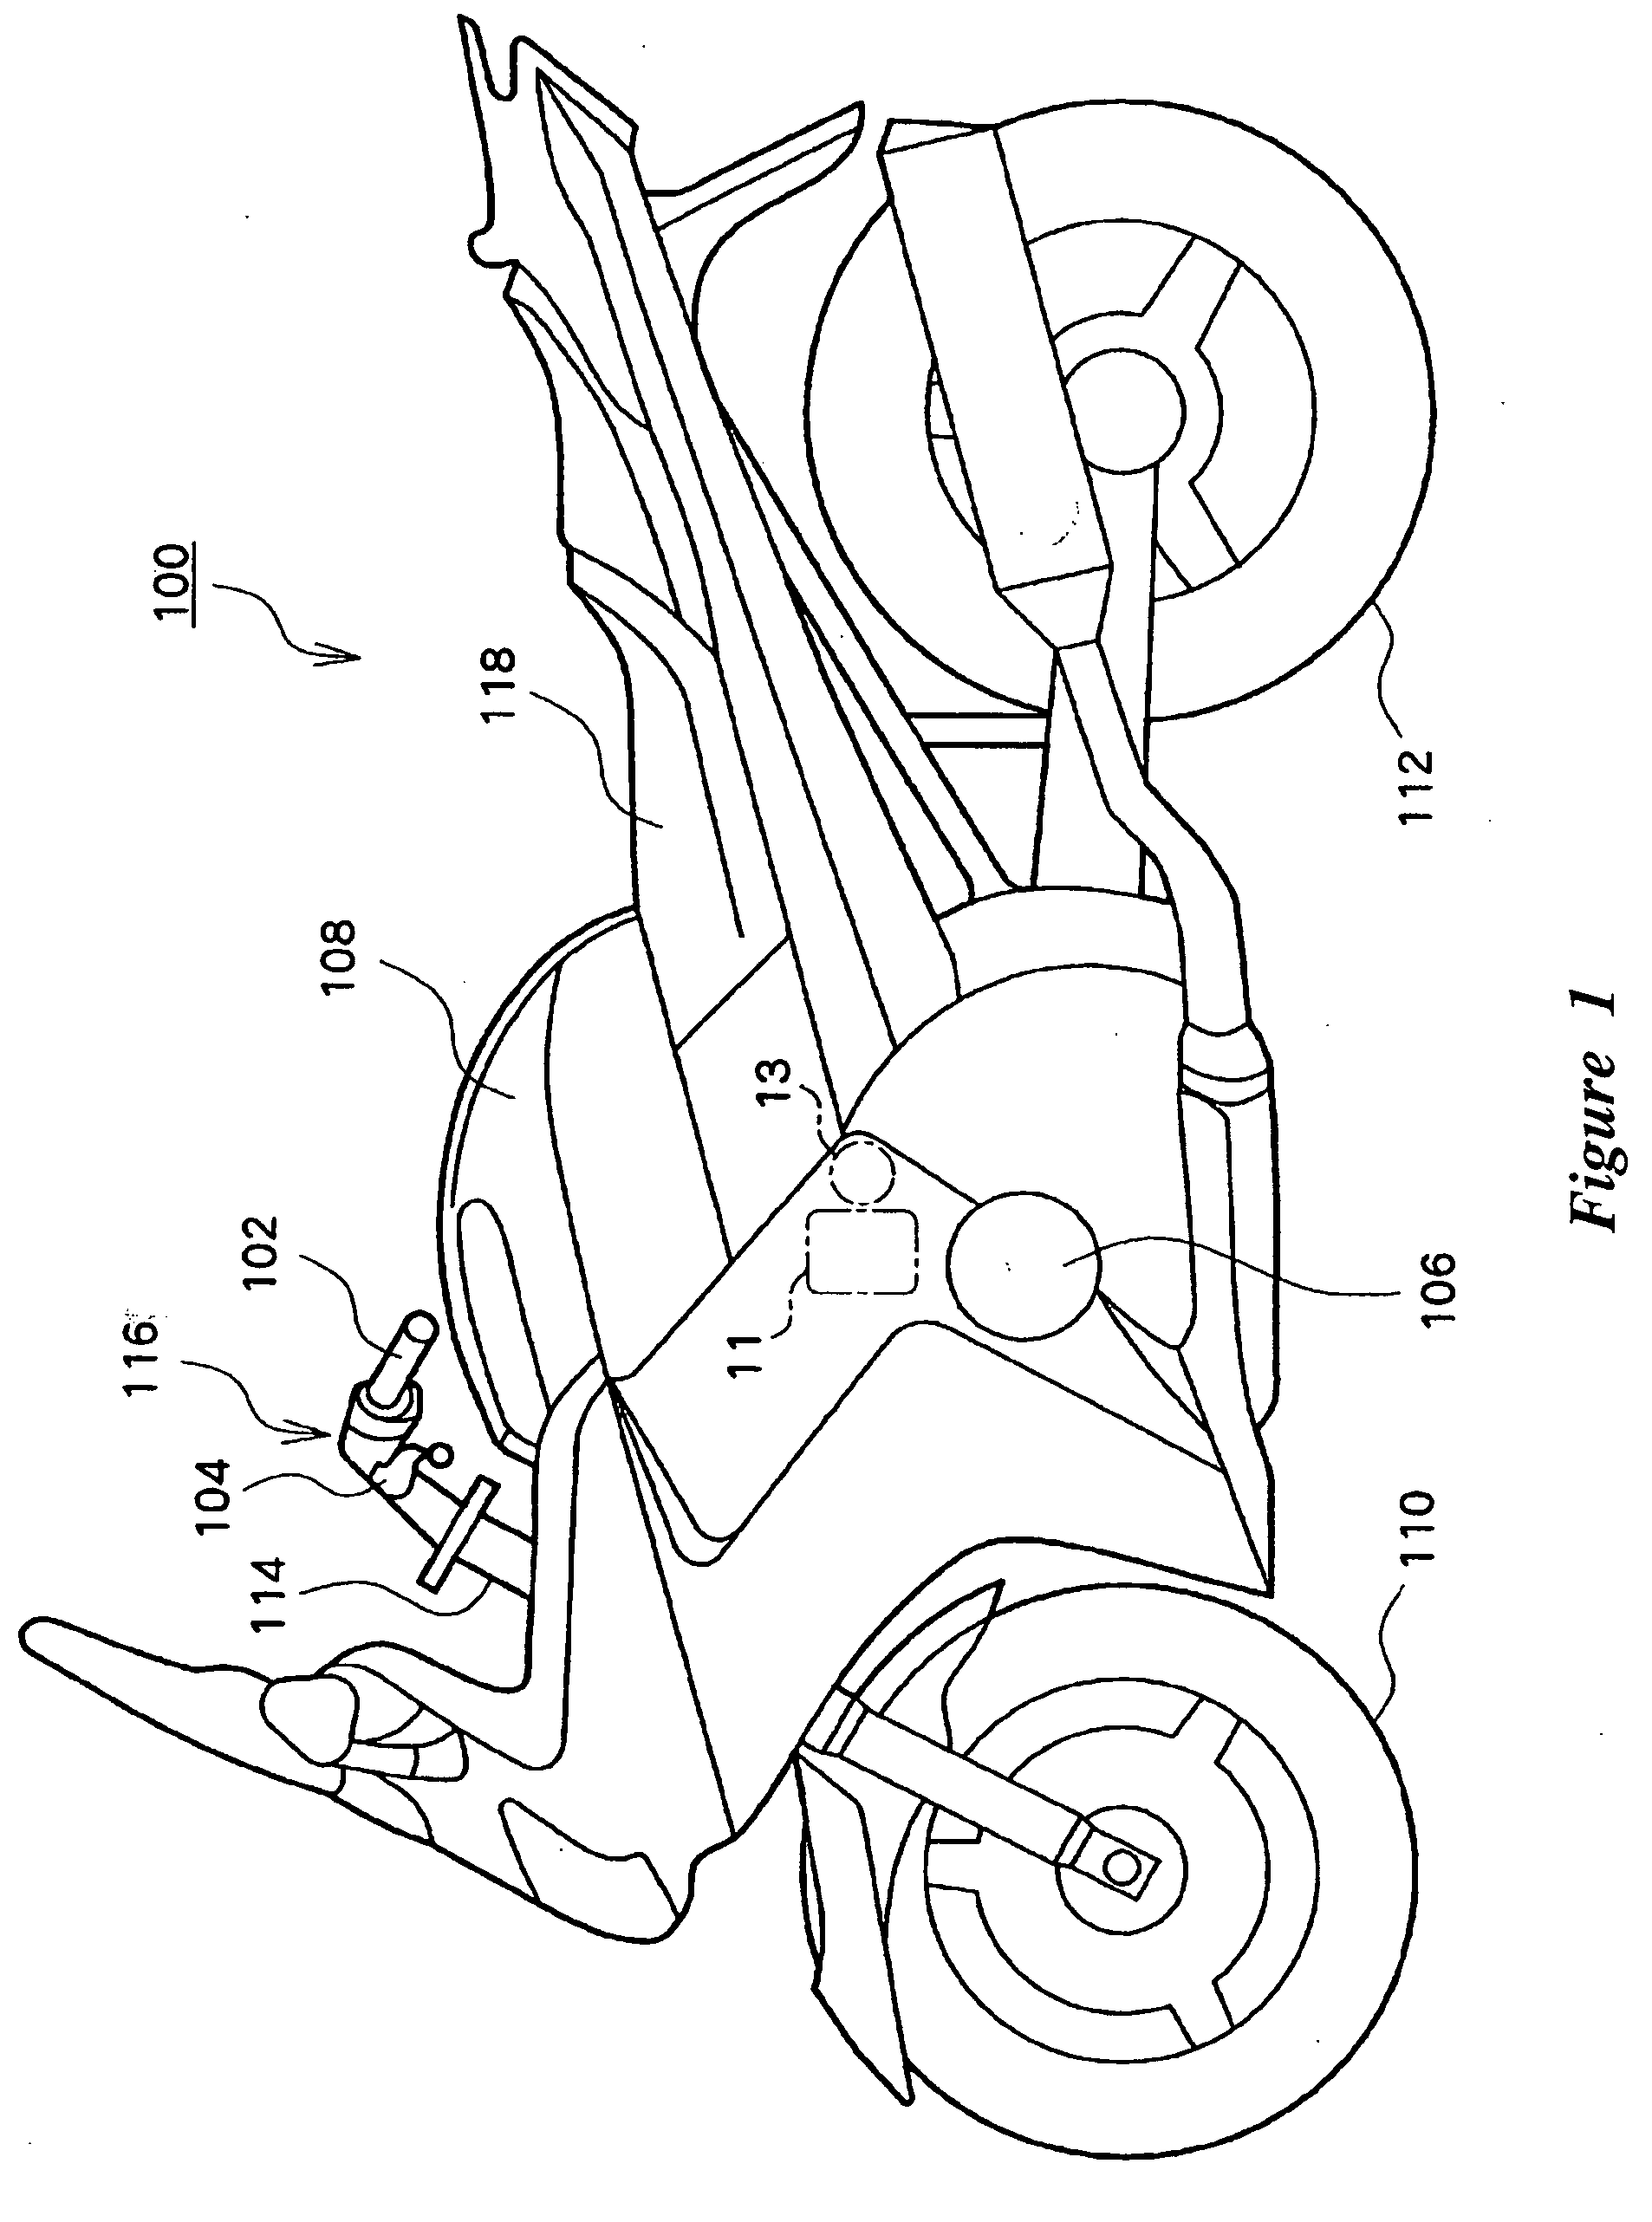 Straddle-type vehicle having clutch control device and method of using clutch control device